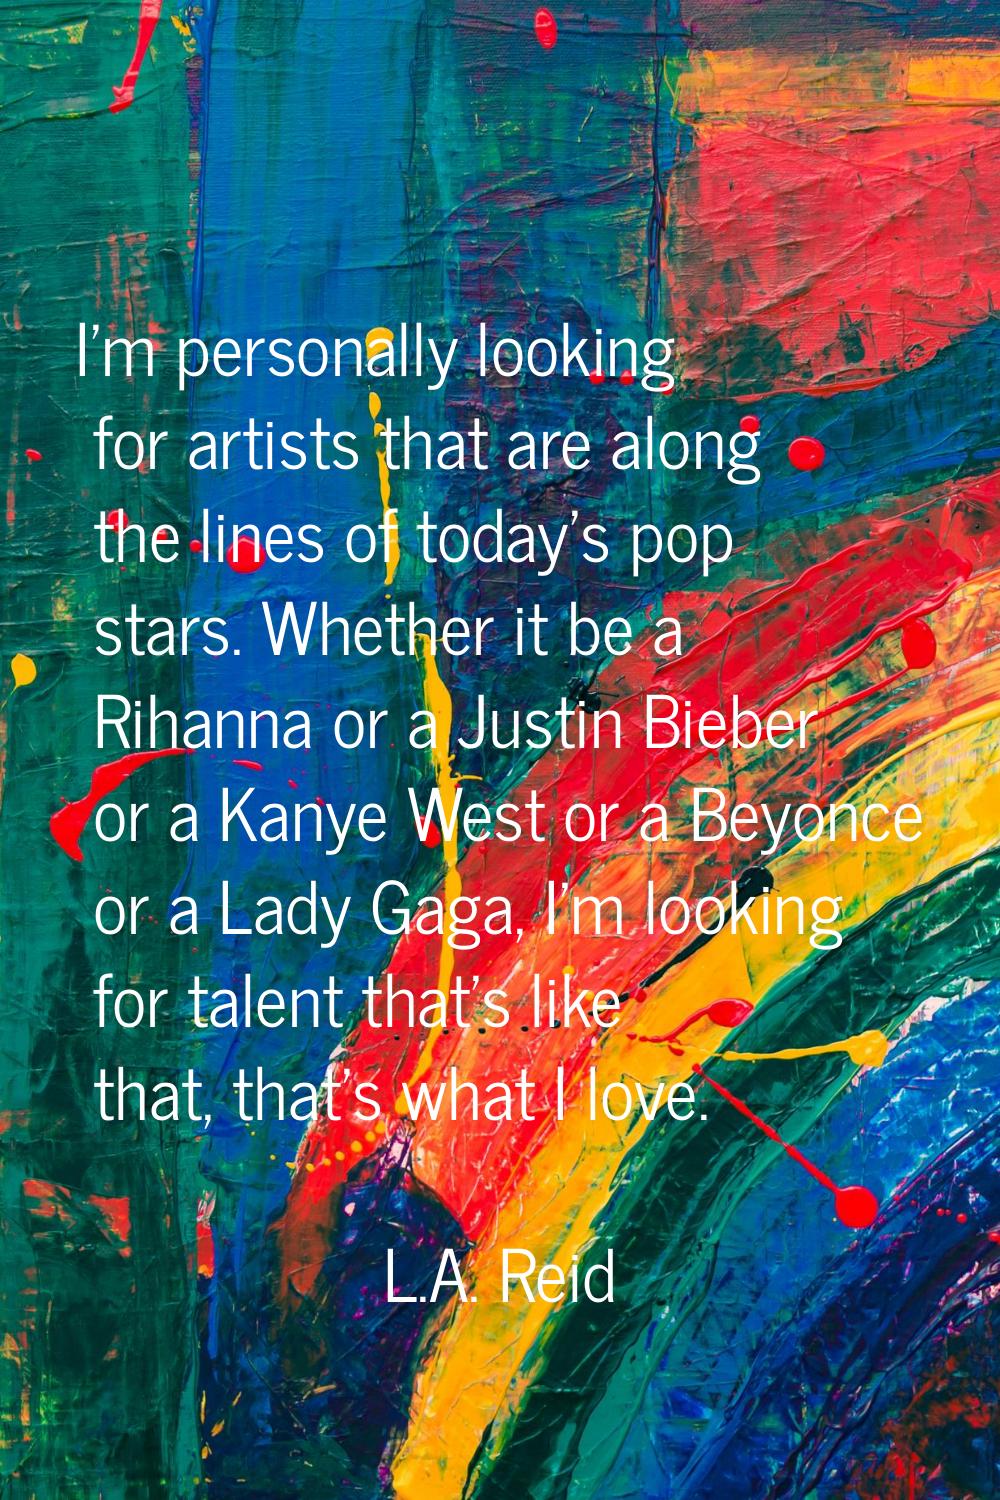 I'm personally looking for artists that are along the lines of today's pop stars. Whether it be a R